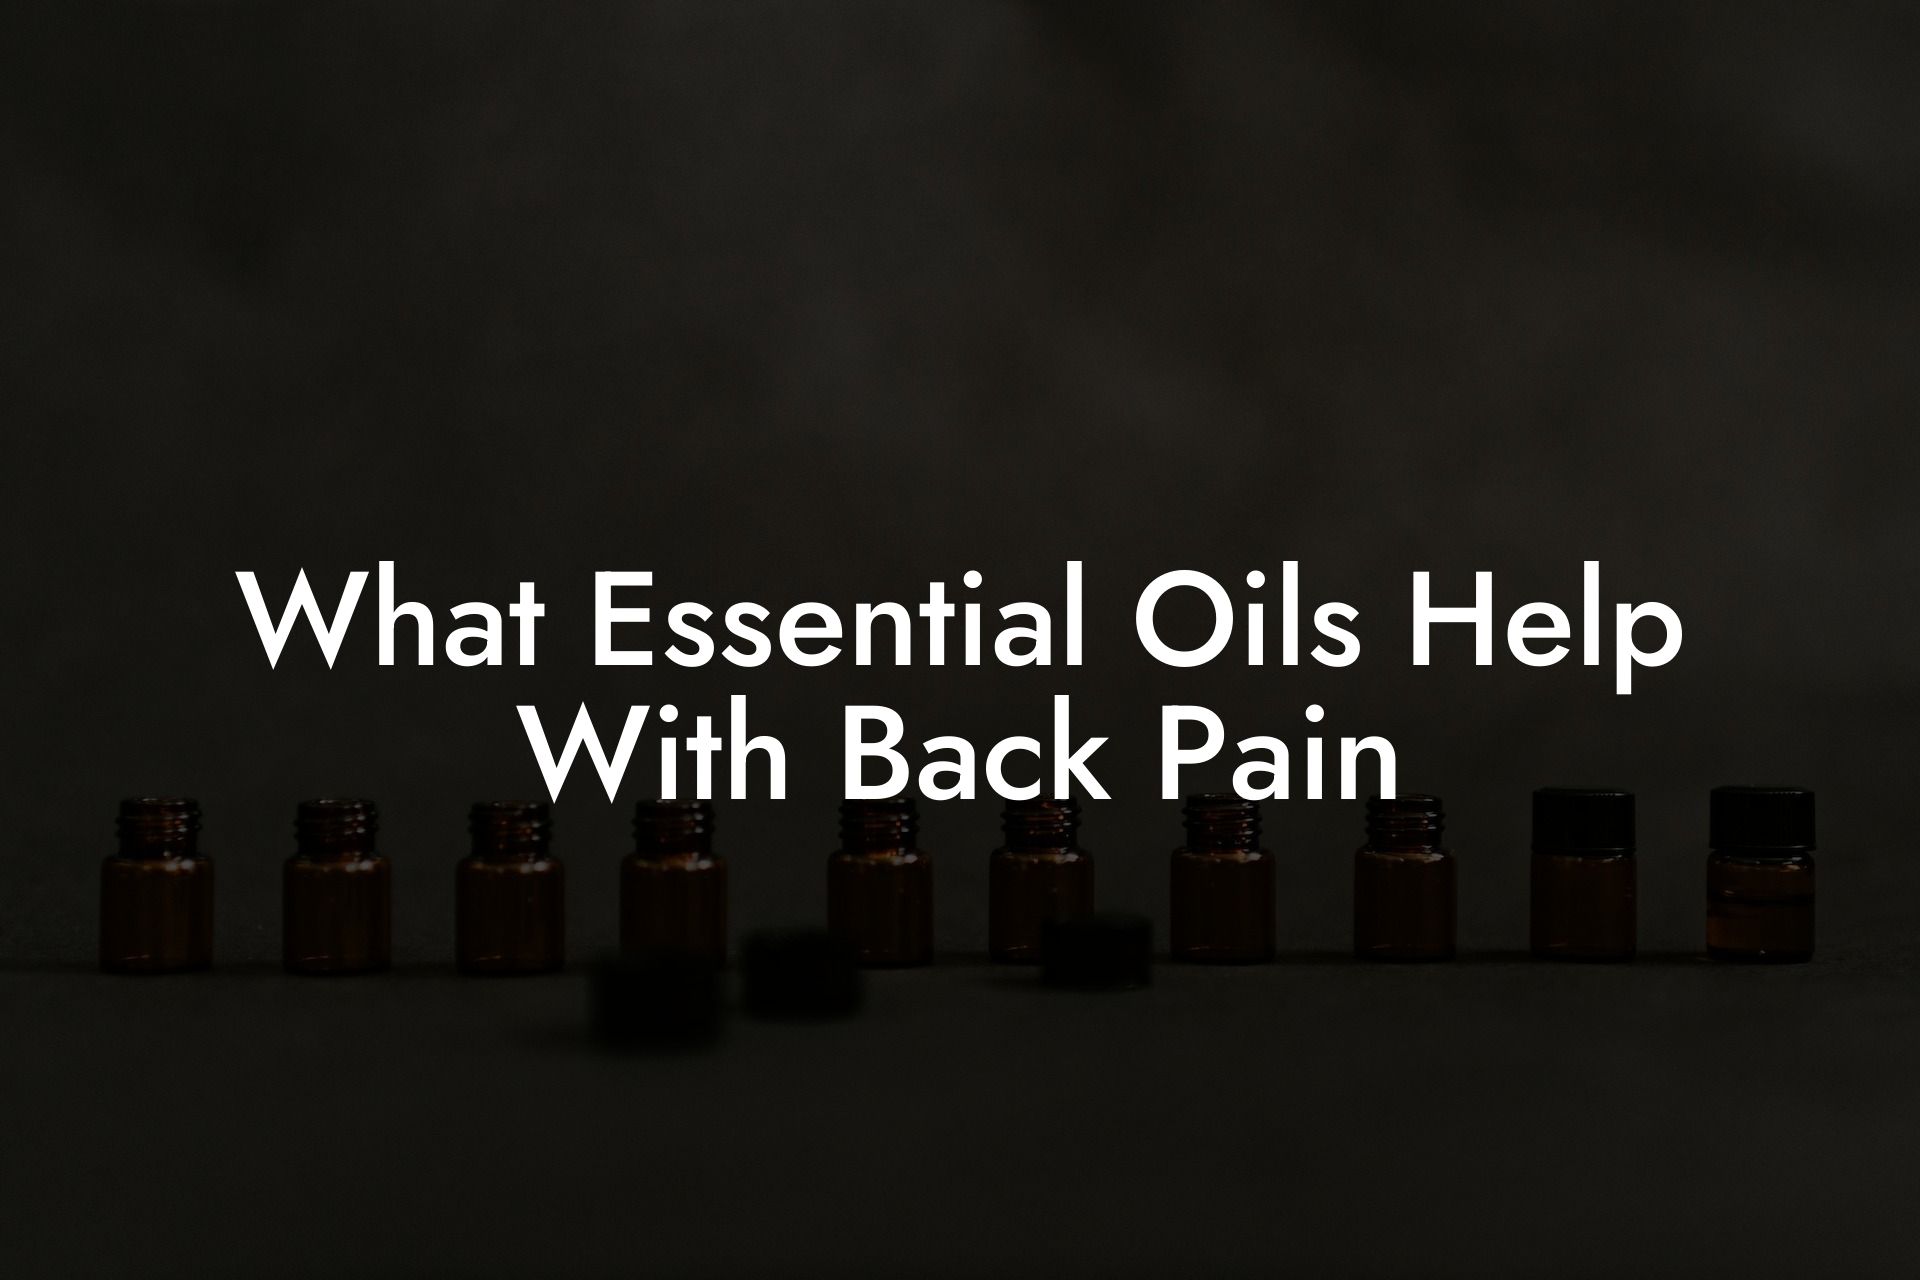 What Essential Oils Help With Back Pain